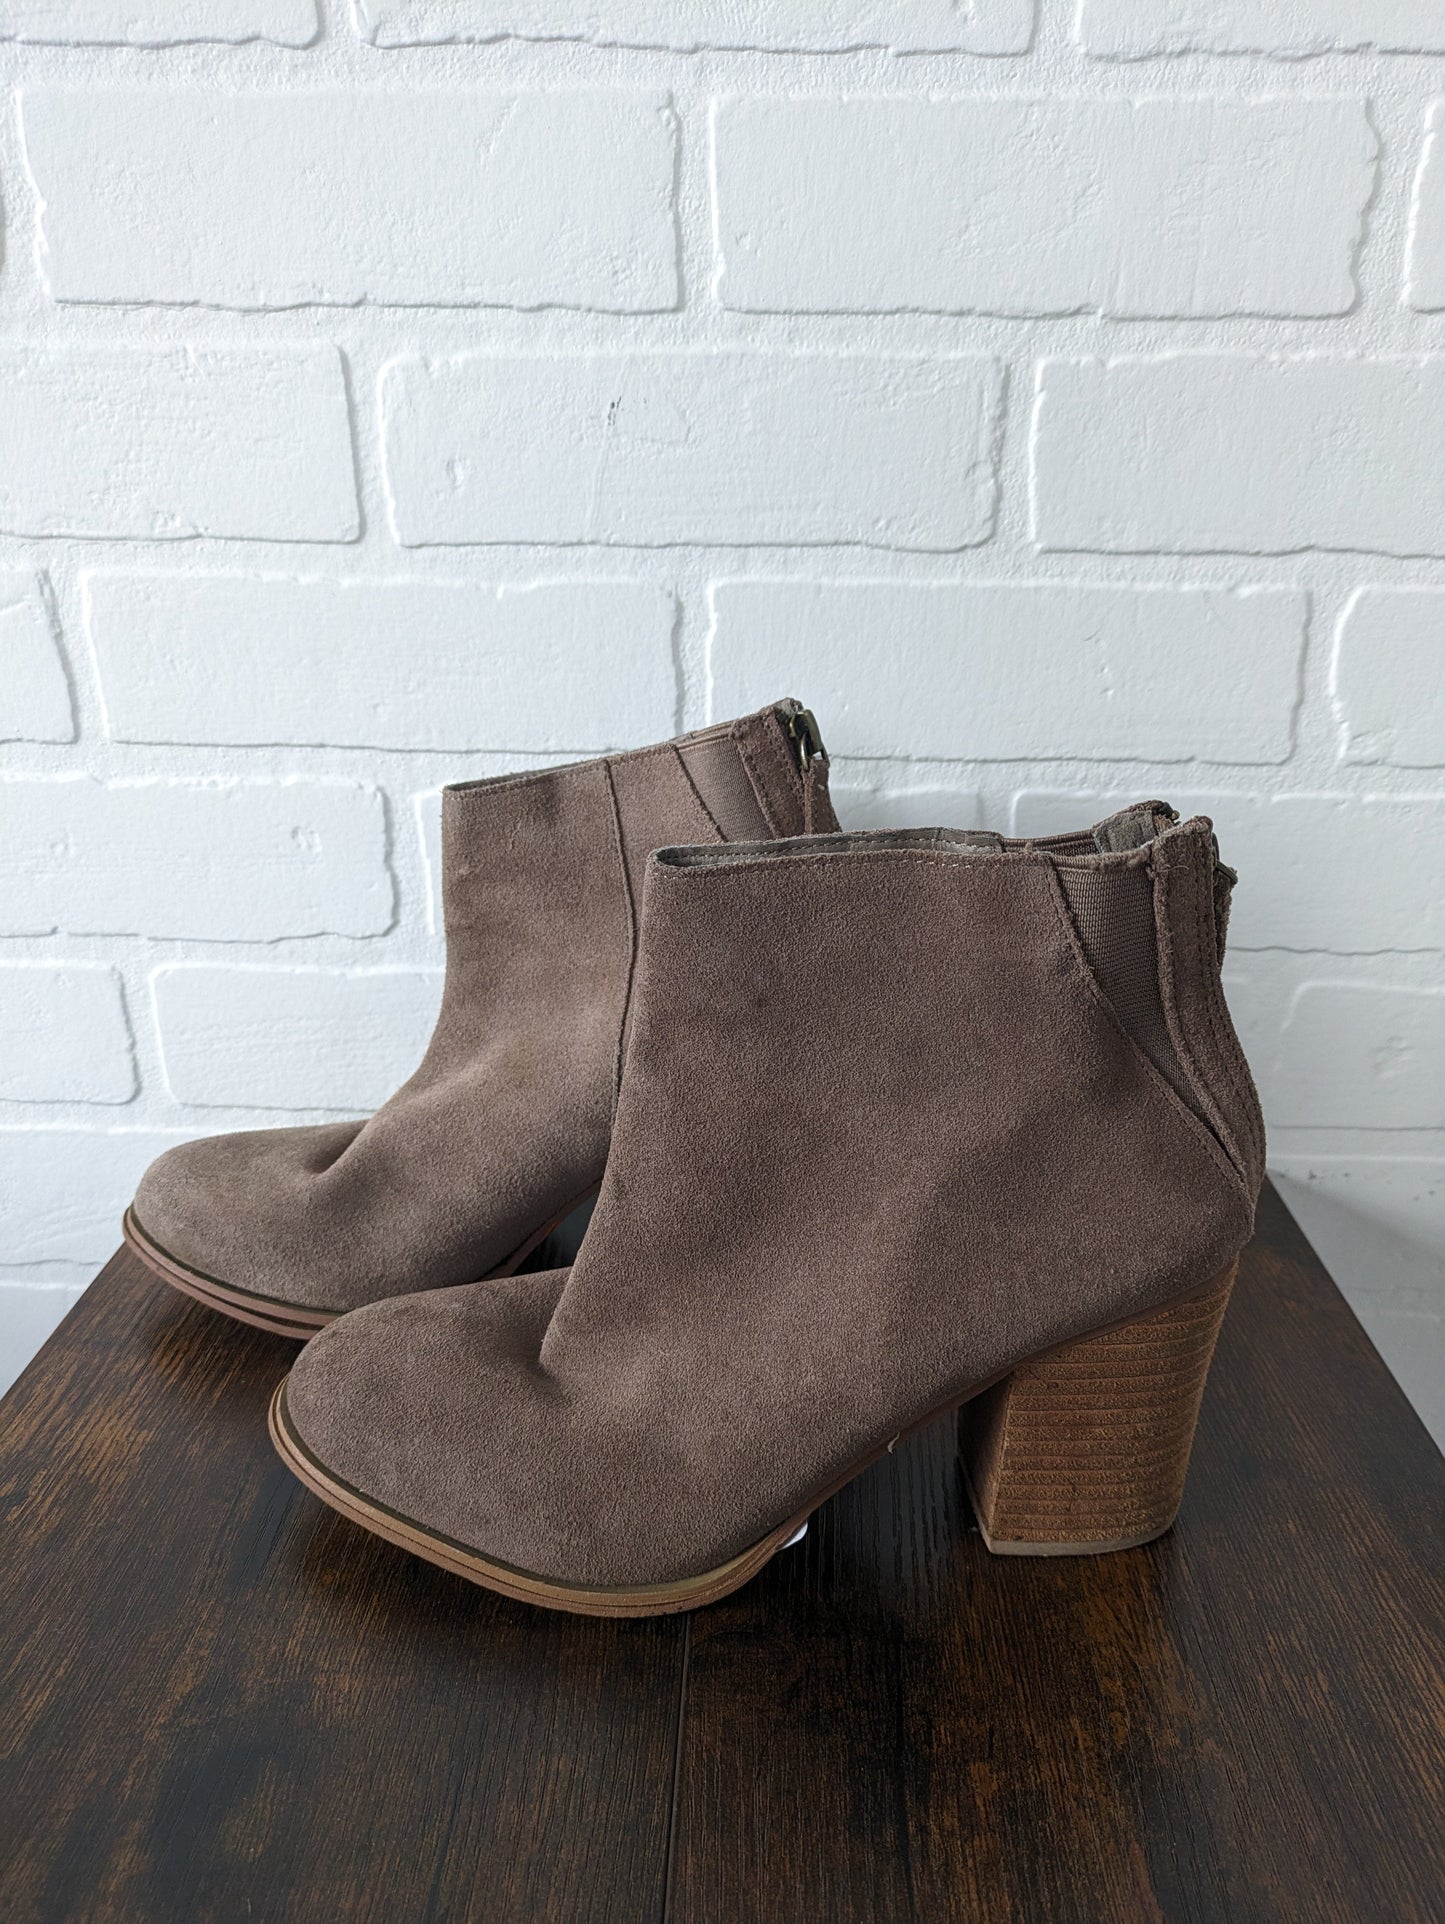 Boots Ankle Heels By Urban Outfitters  Size: 8